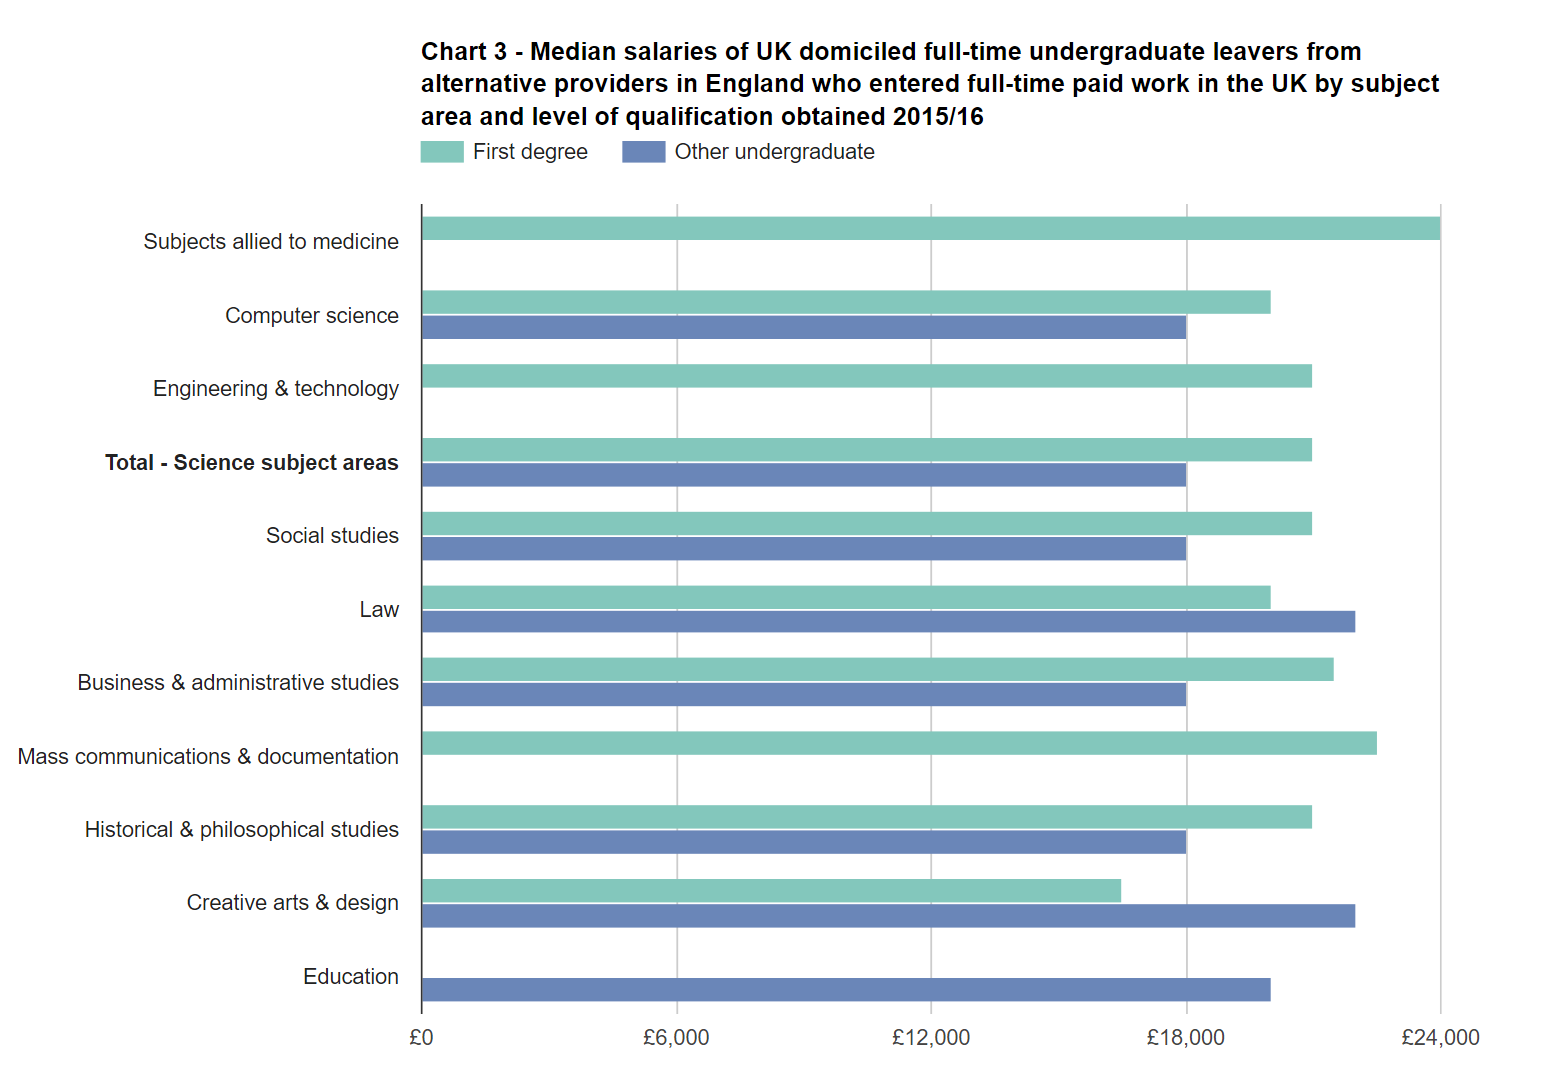 Chart 3 - Median salaries of UK domiciled full-time undergraduate leavers from alternative providers in England who entered full-time paid work in the UK by subject area and level of qualification obtained 2015/16